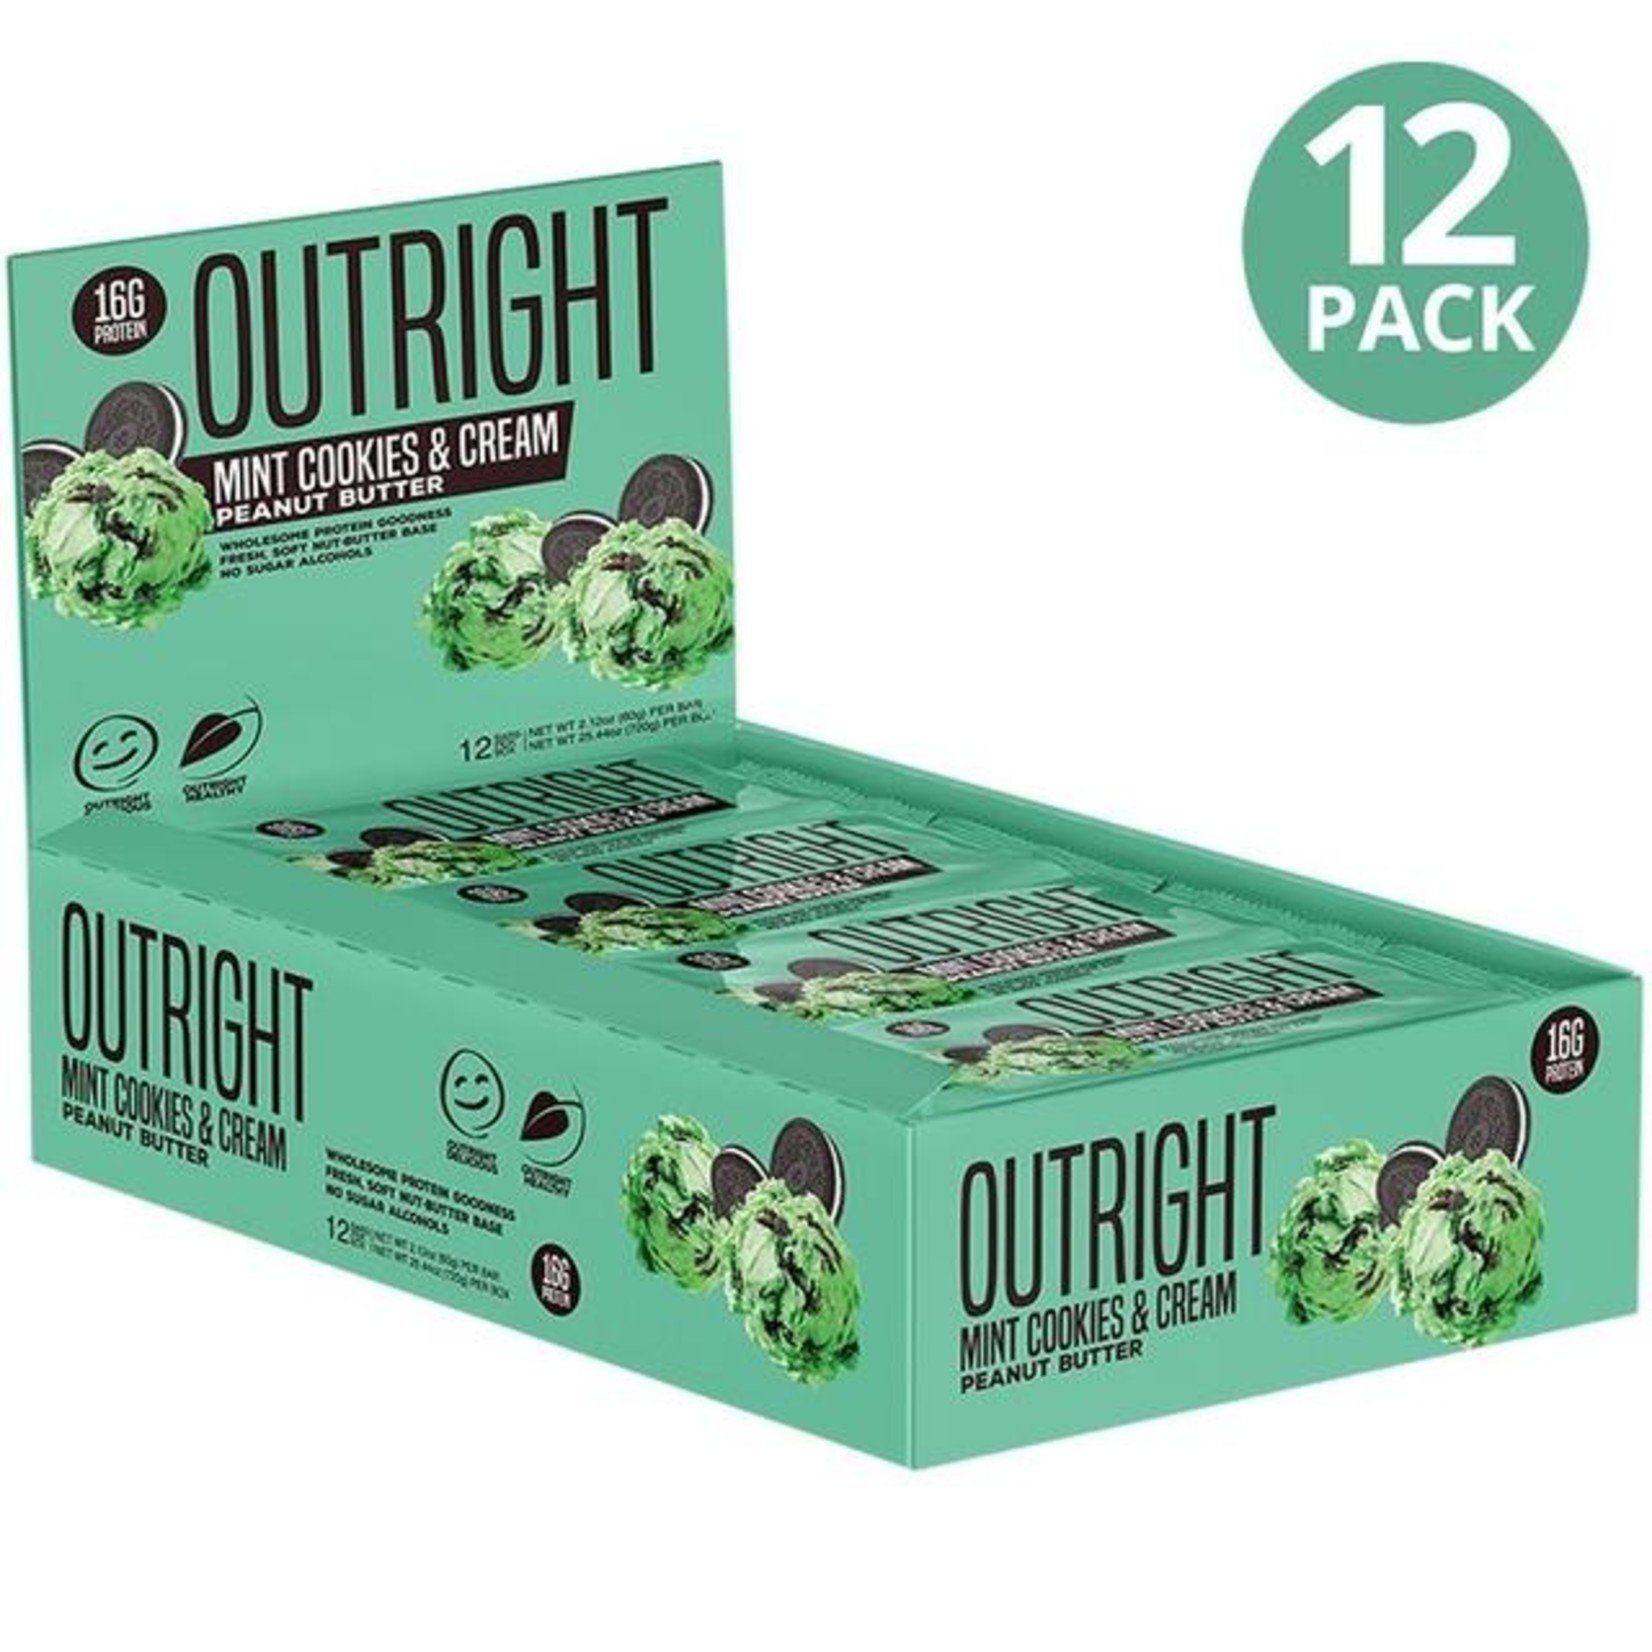 MTS Nutrition Outright Mint Cookies & Cream Peanut Butter